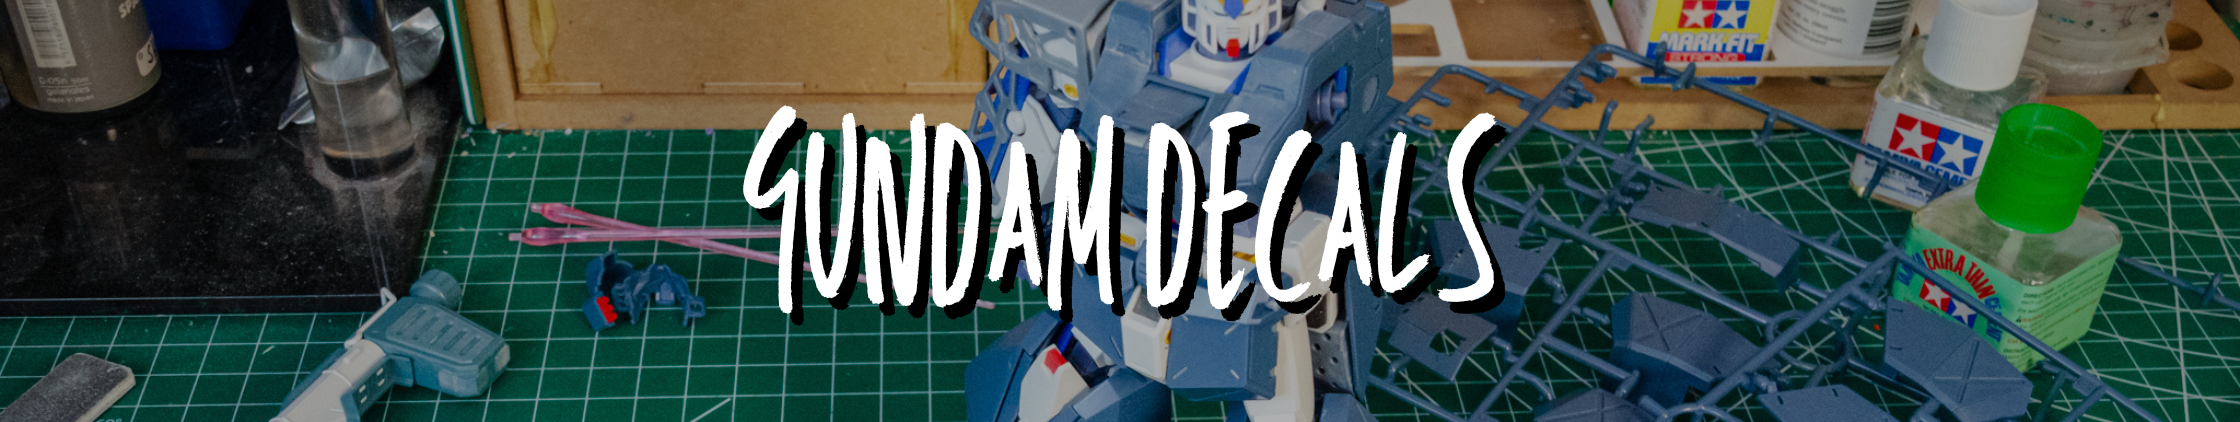 Gundam Decals for Gunpla model kits at BC Hobbies, a Canadian hobby shop and online store based out of  Victoria BC.